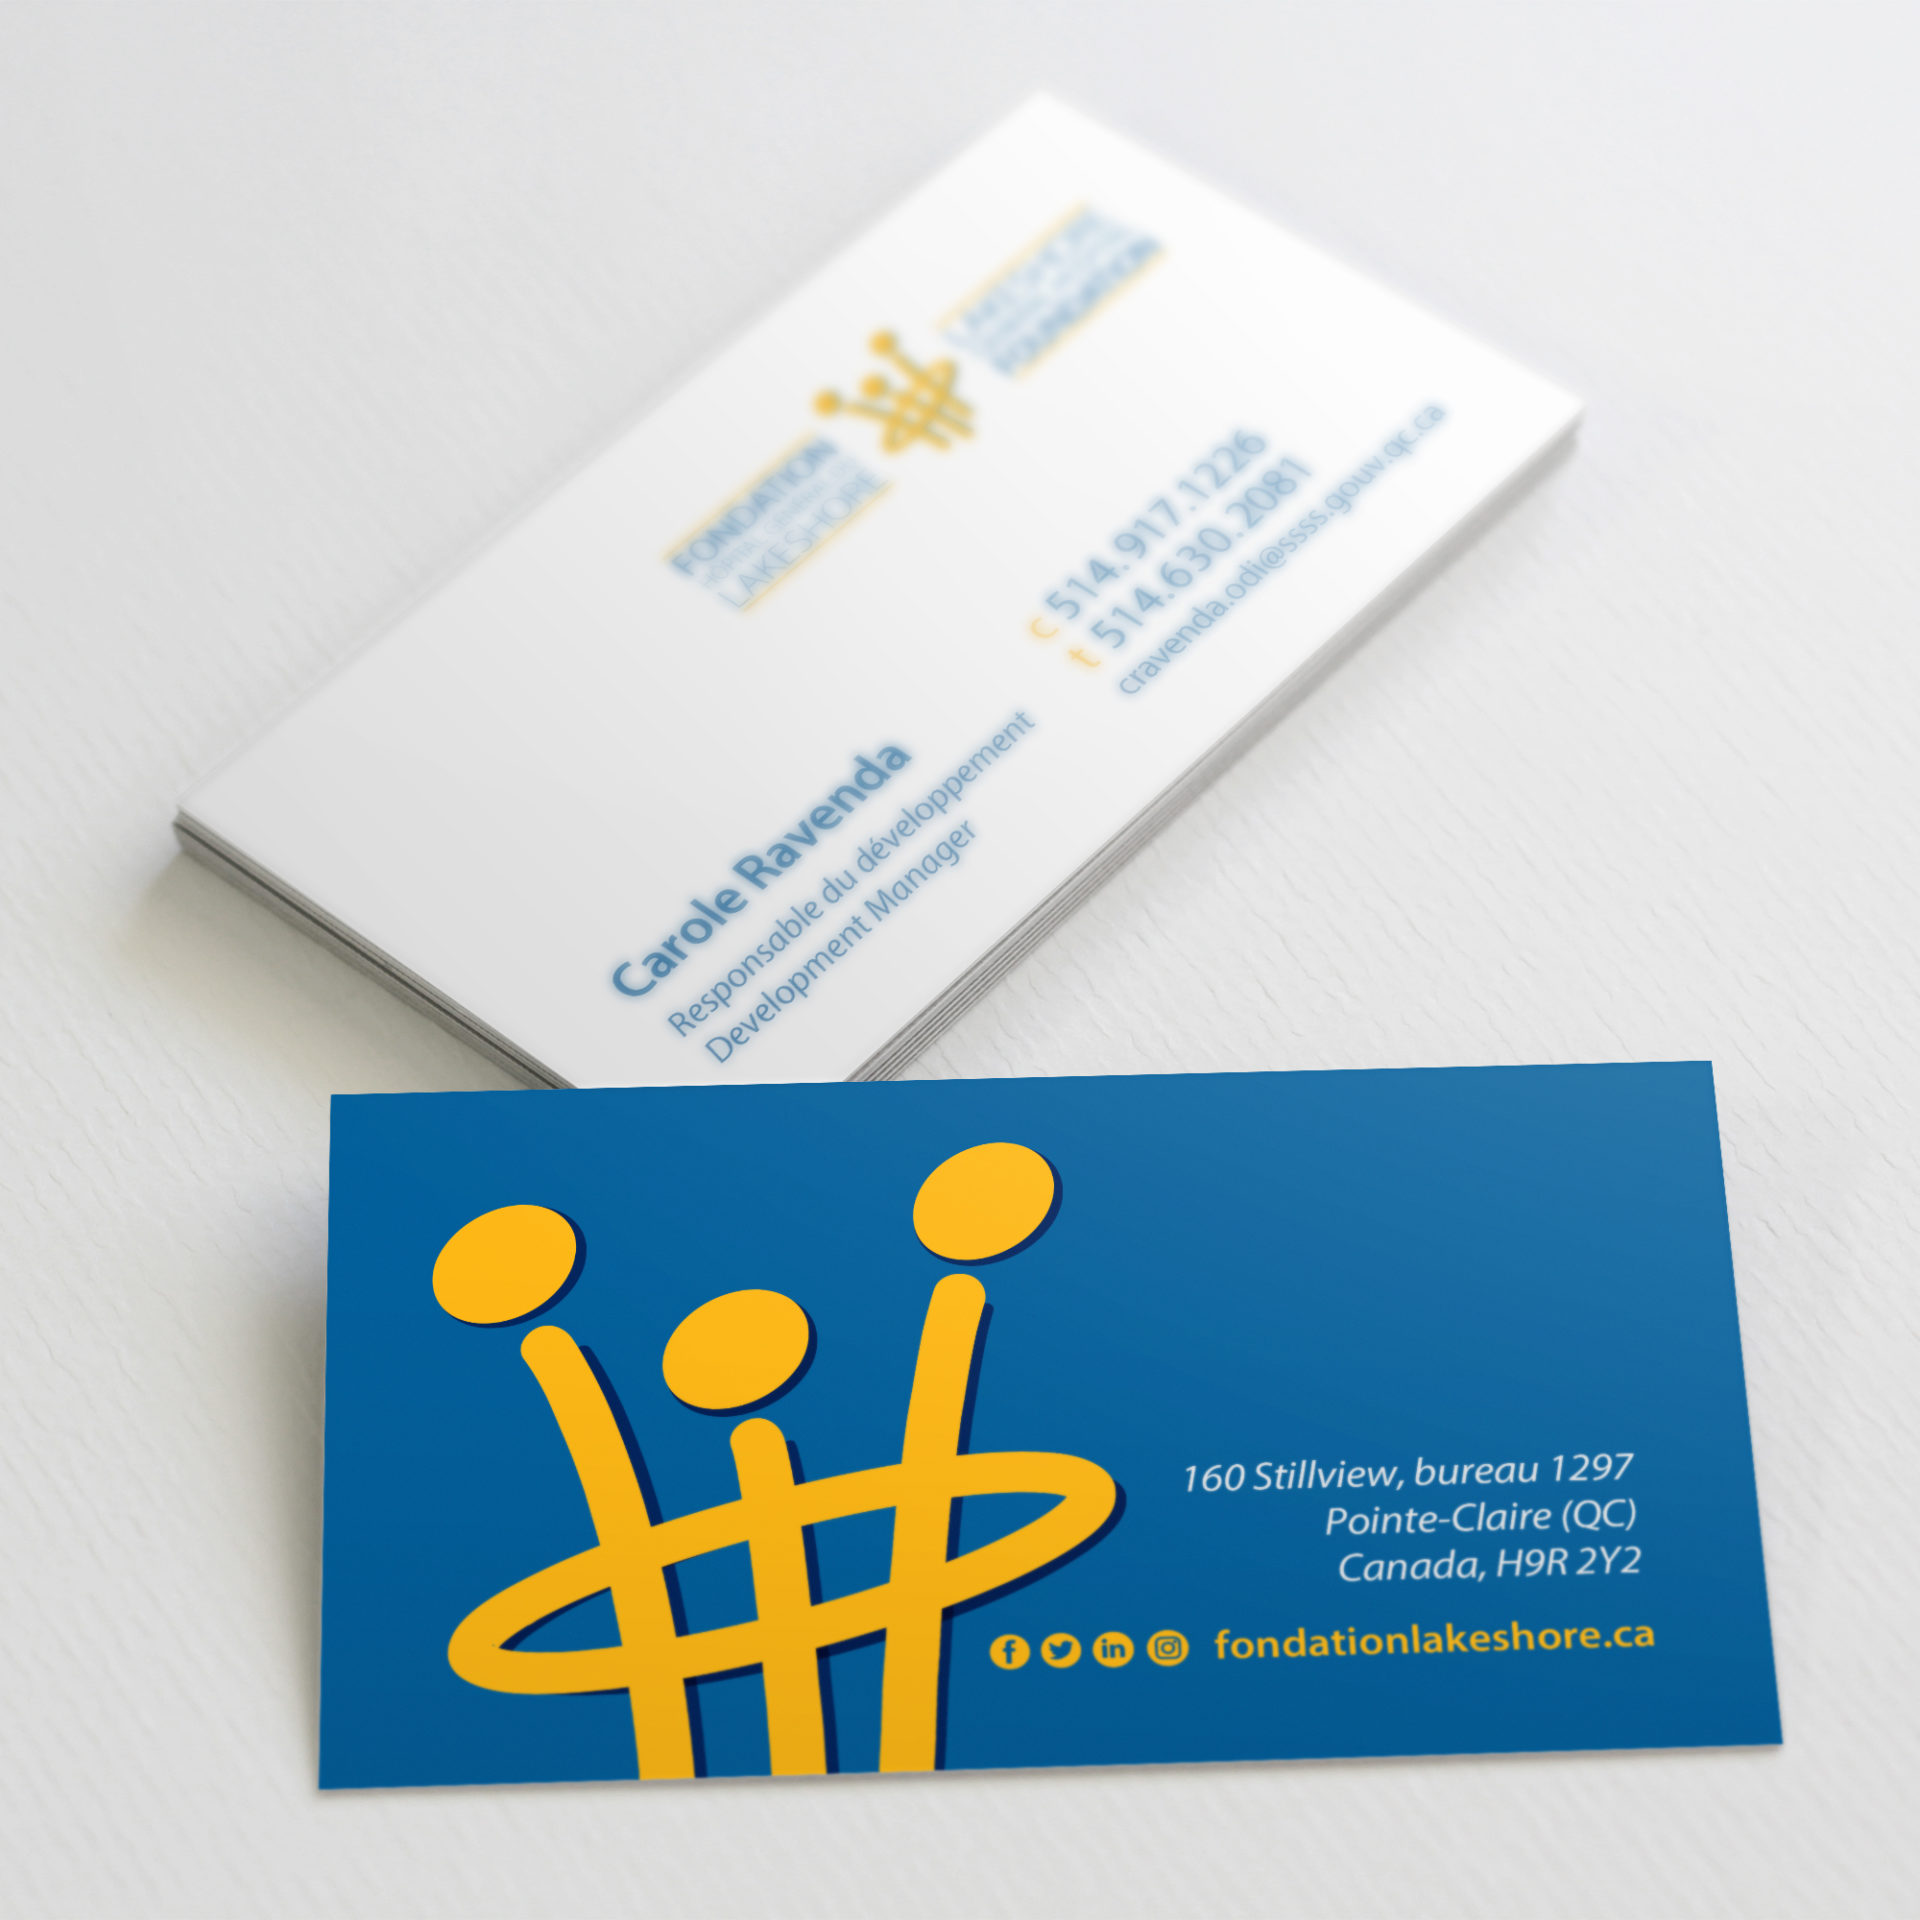 Front and back of business cards with blue background and yellow logo mark on one side and contact information on the other.